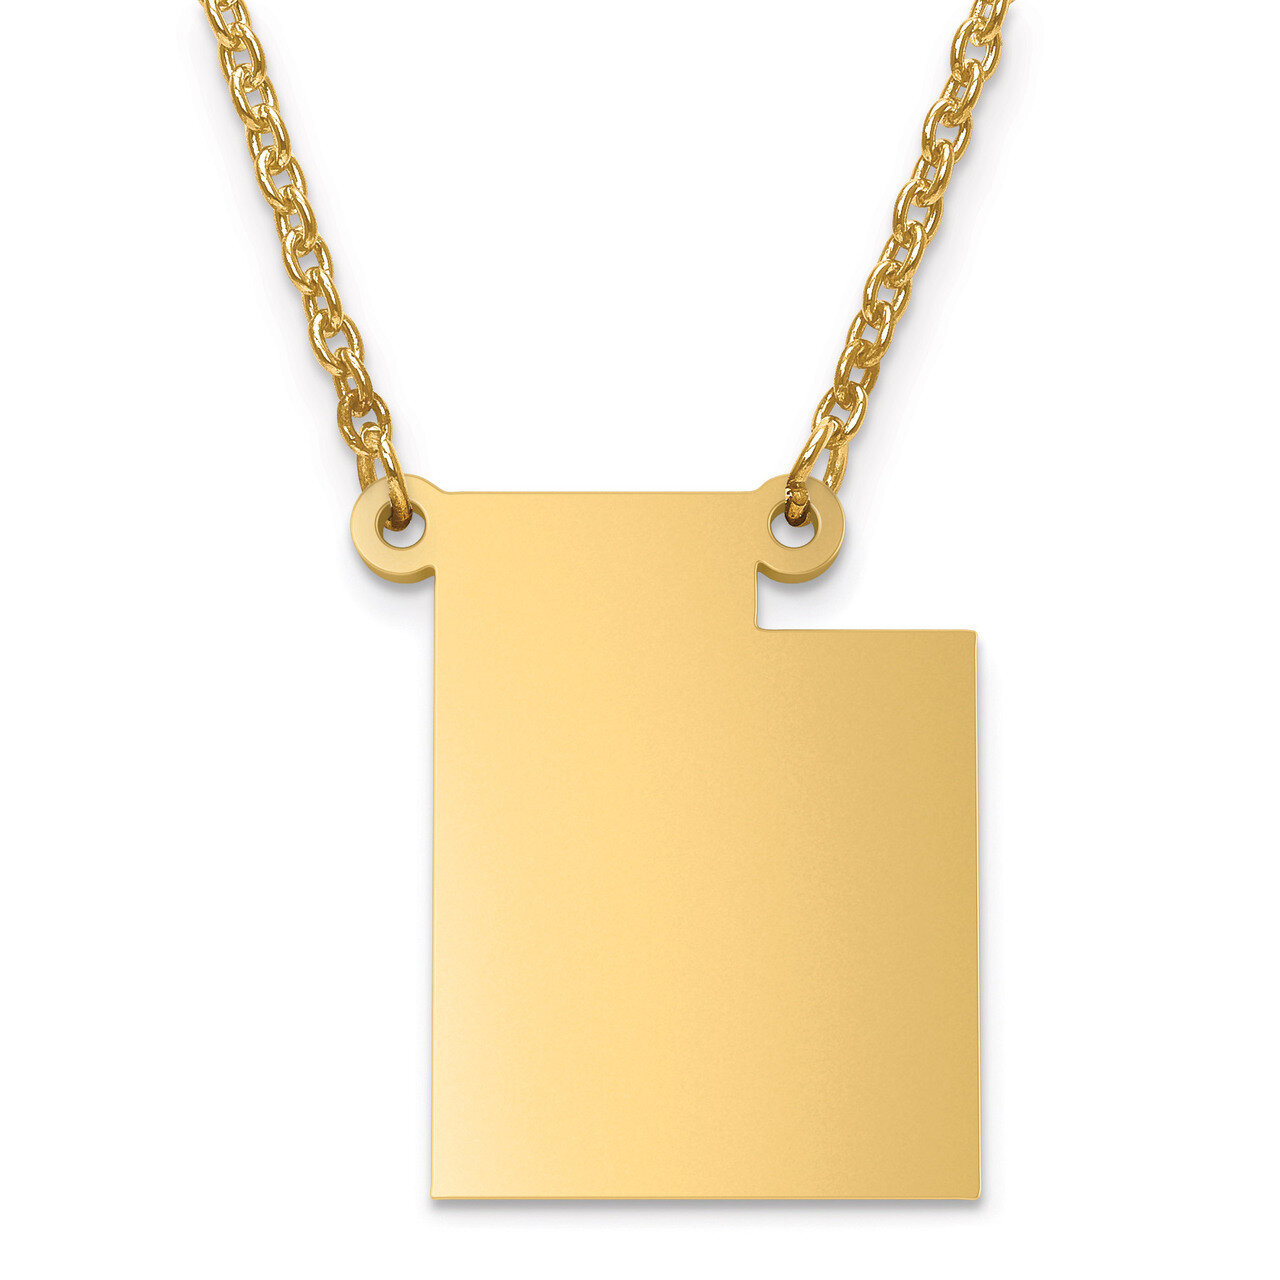 Utah State Pendant with Chain Engravable Gold-plated on Sterling Silver